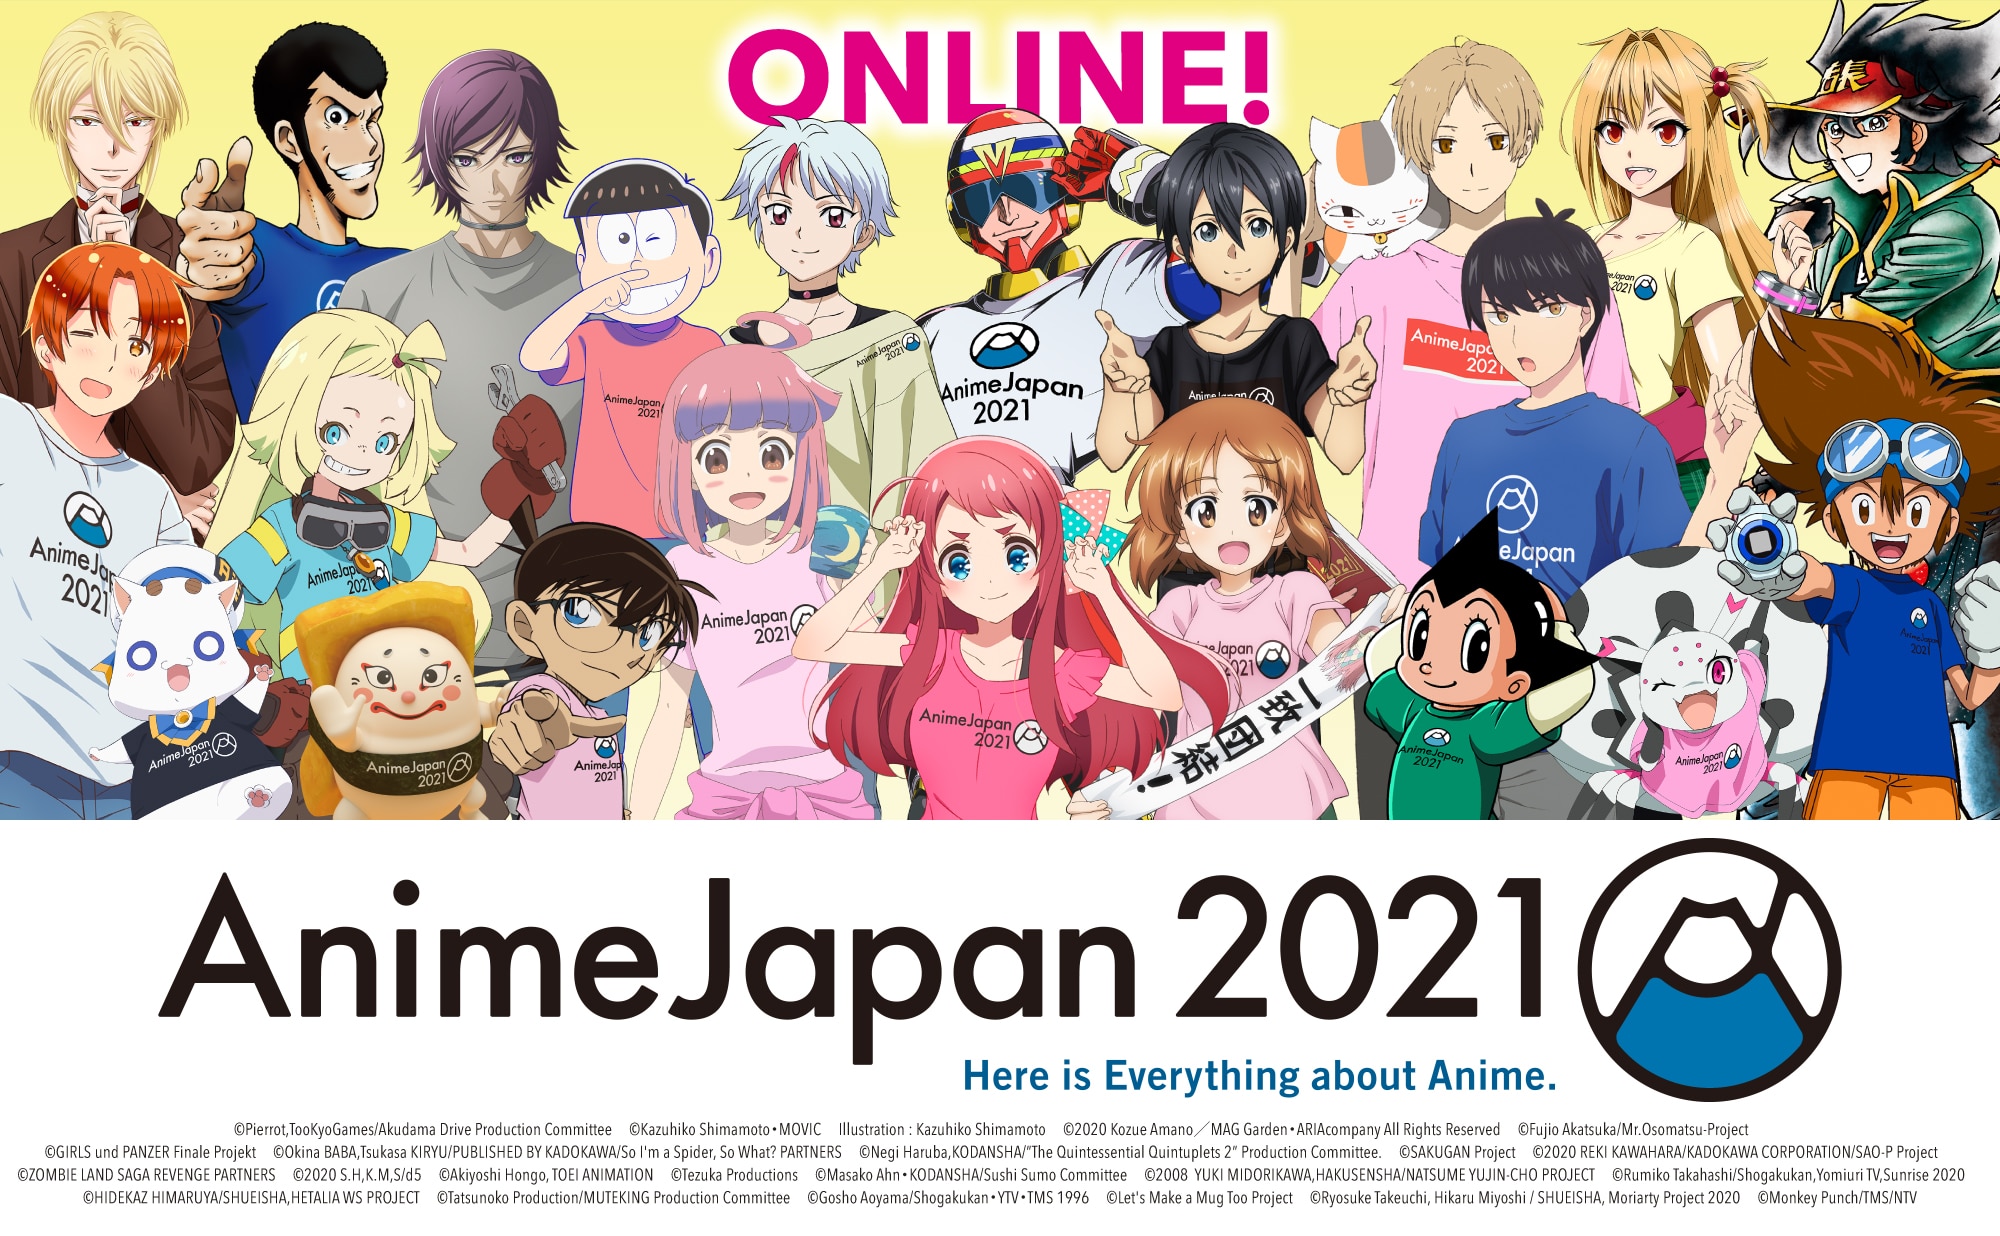 Anime Japan 2022 - Ultimate Guide for the Biggest Anime Convention